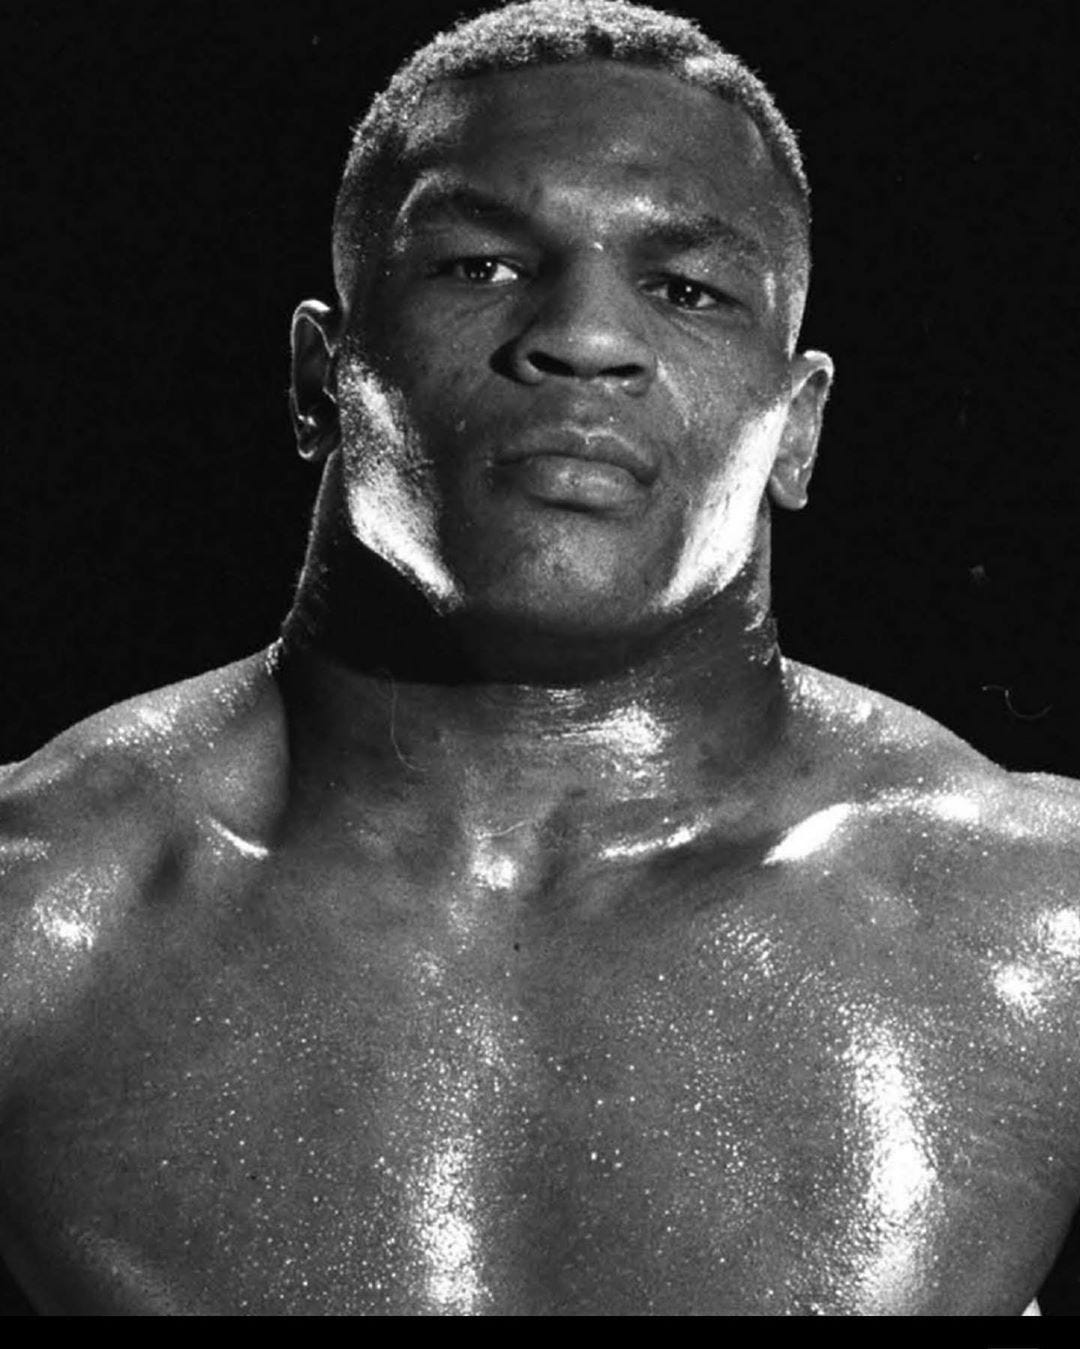 Pin by Francimar F on Fotografia rosto | Mike tyson boxing, Mike tyson,  Boxing images